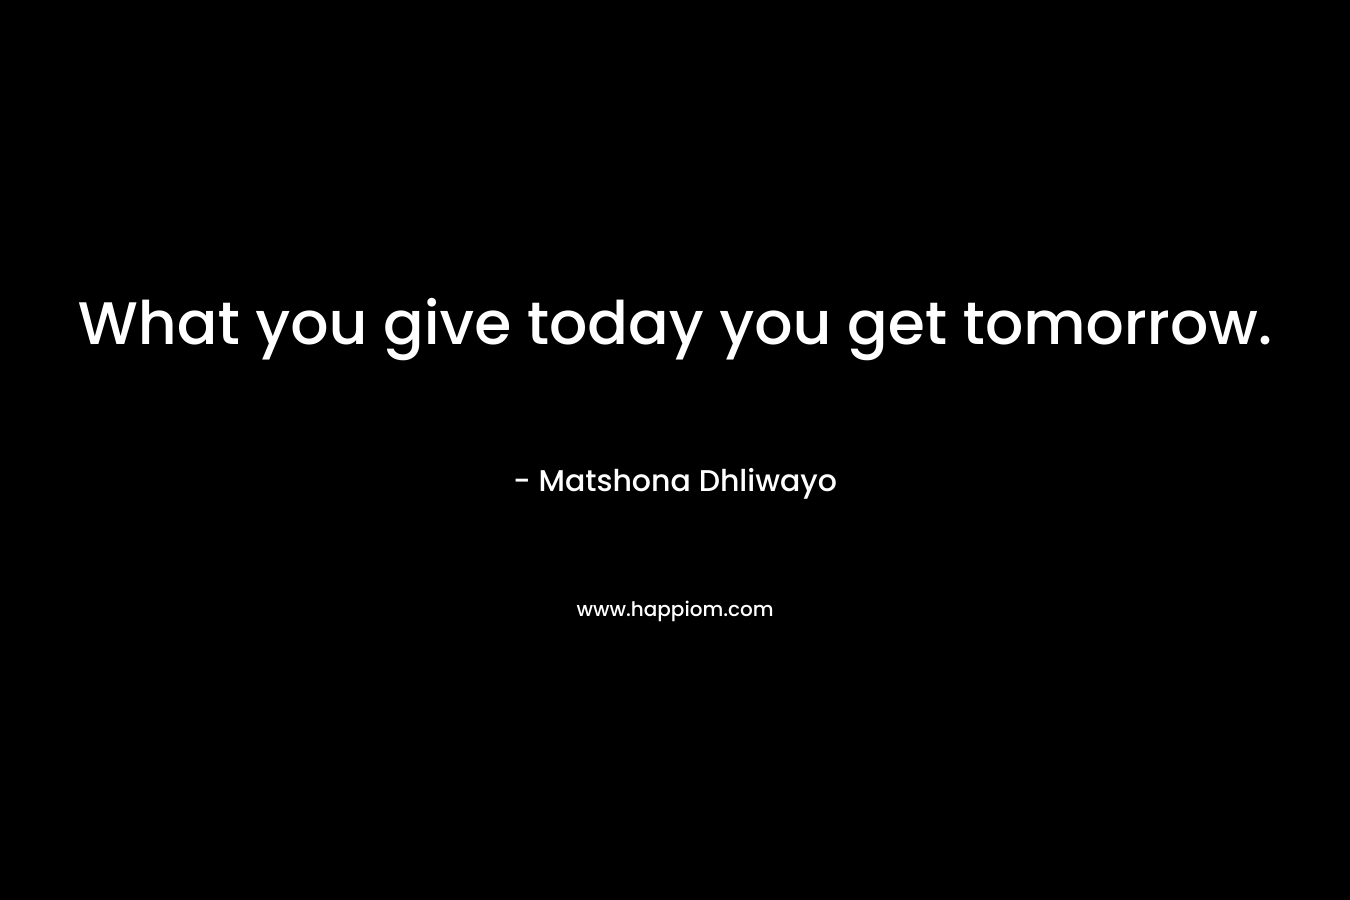 What you give today you get tomorrow.